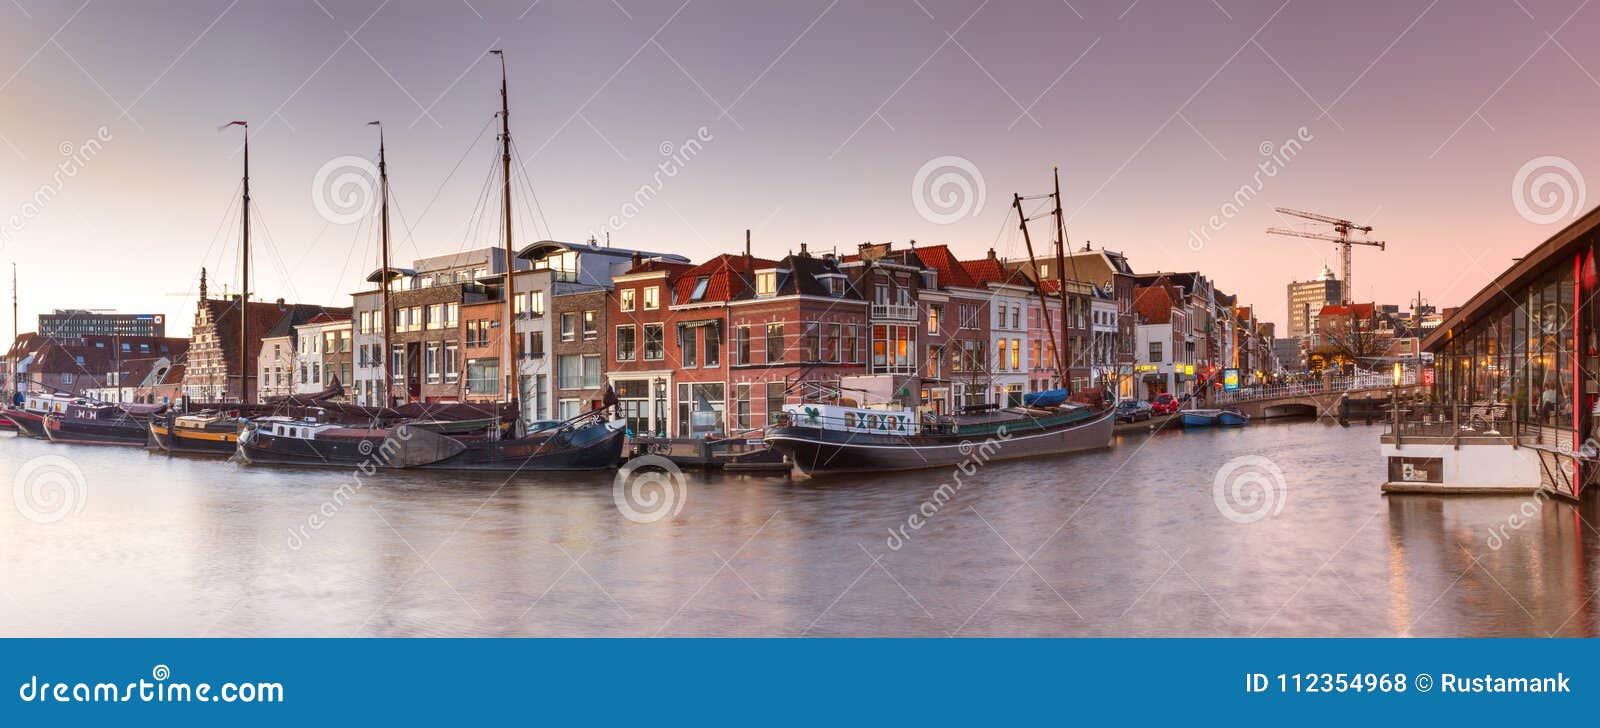 cityscape, panorama, banner - view of city channel with ships, the city of leiden